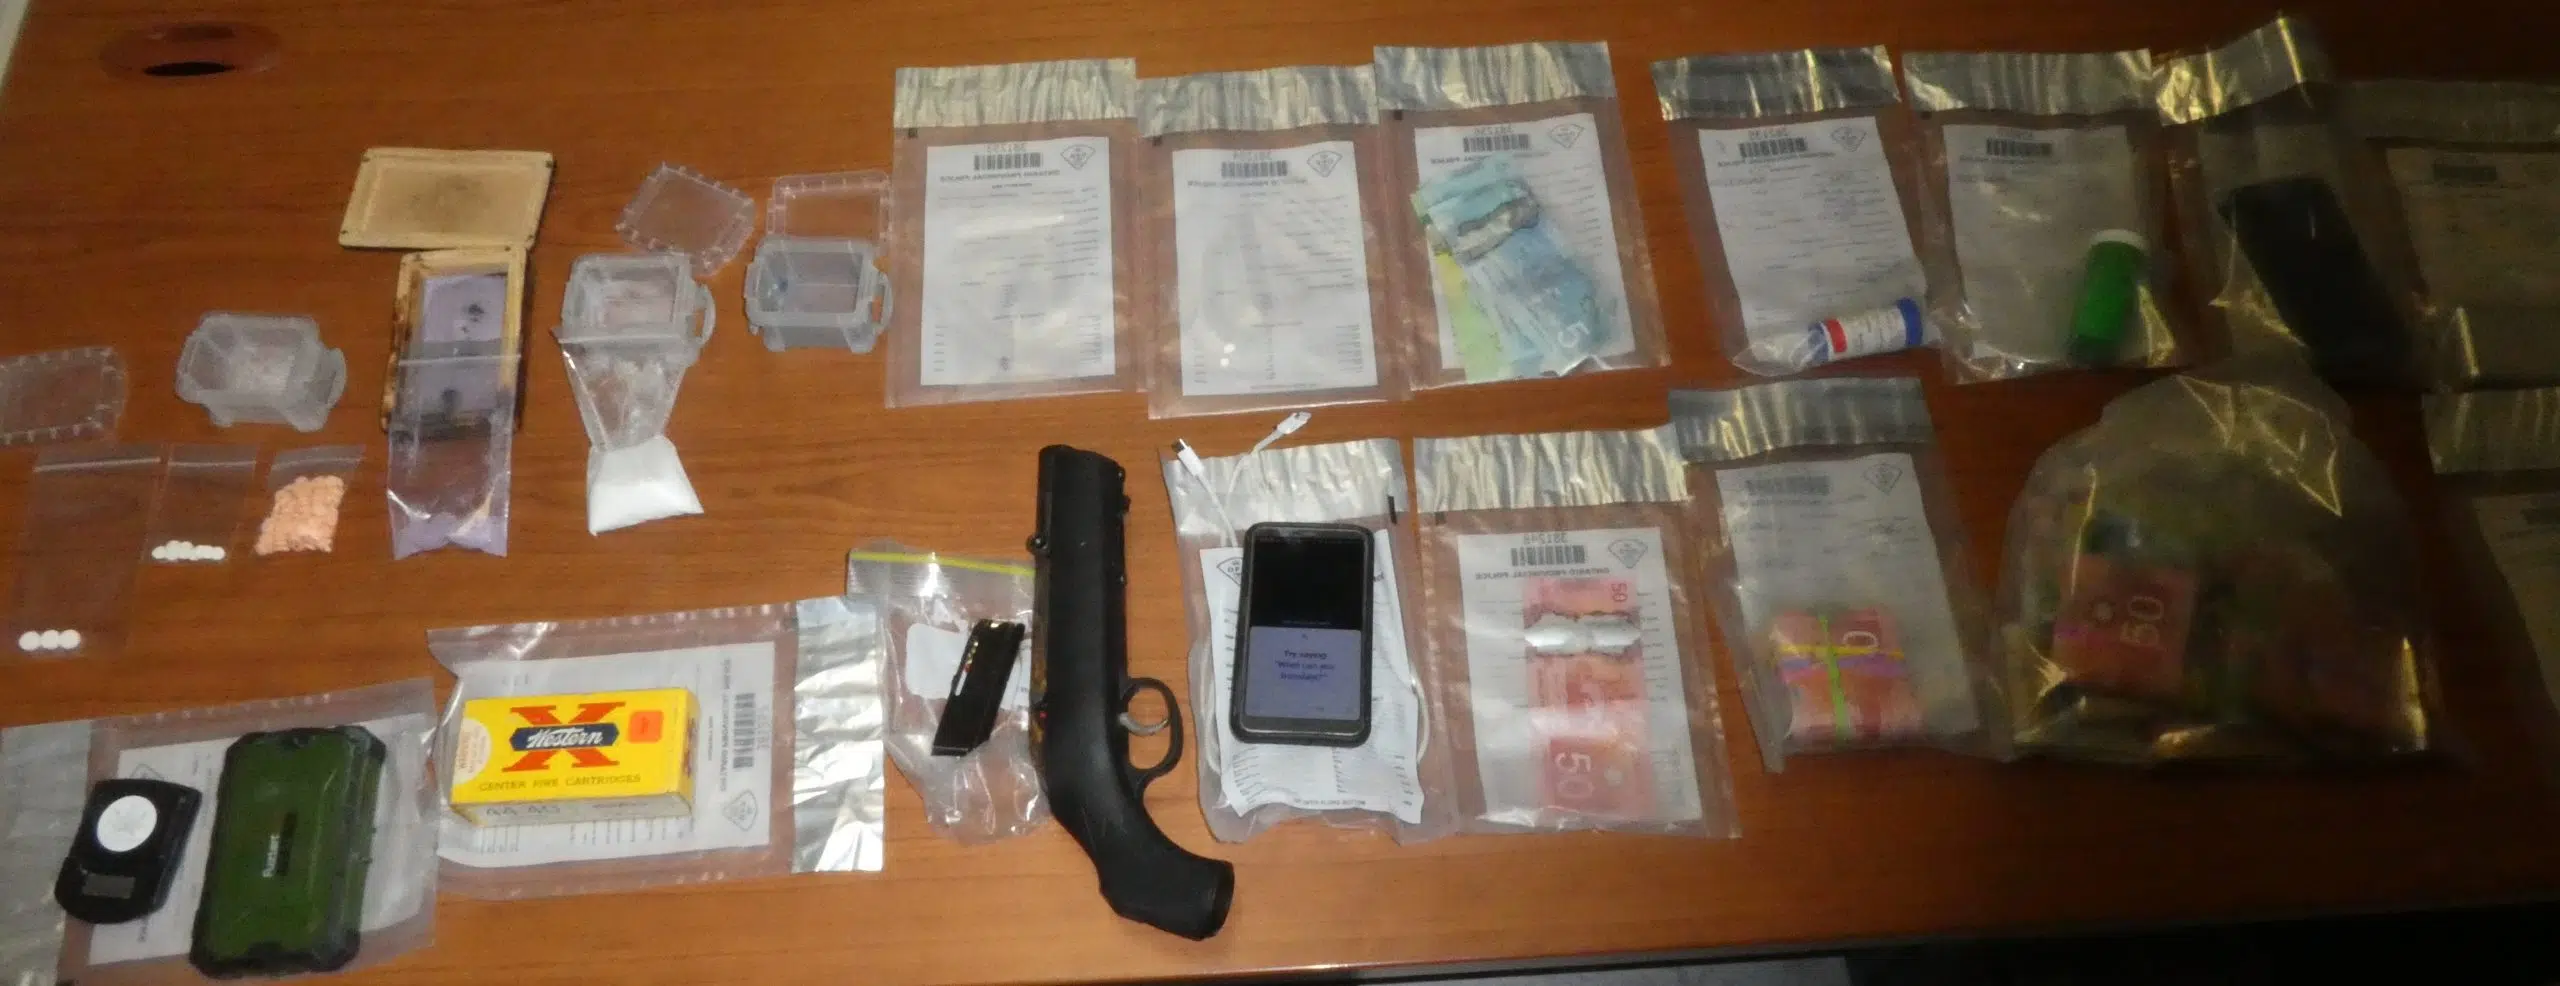 Drugs and Weapons Seized In Joint Drug Raid | PTBO Today